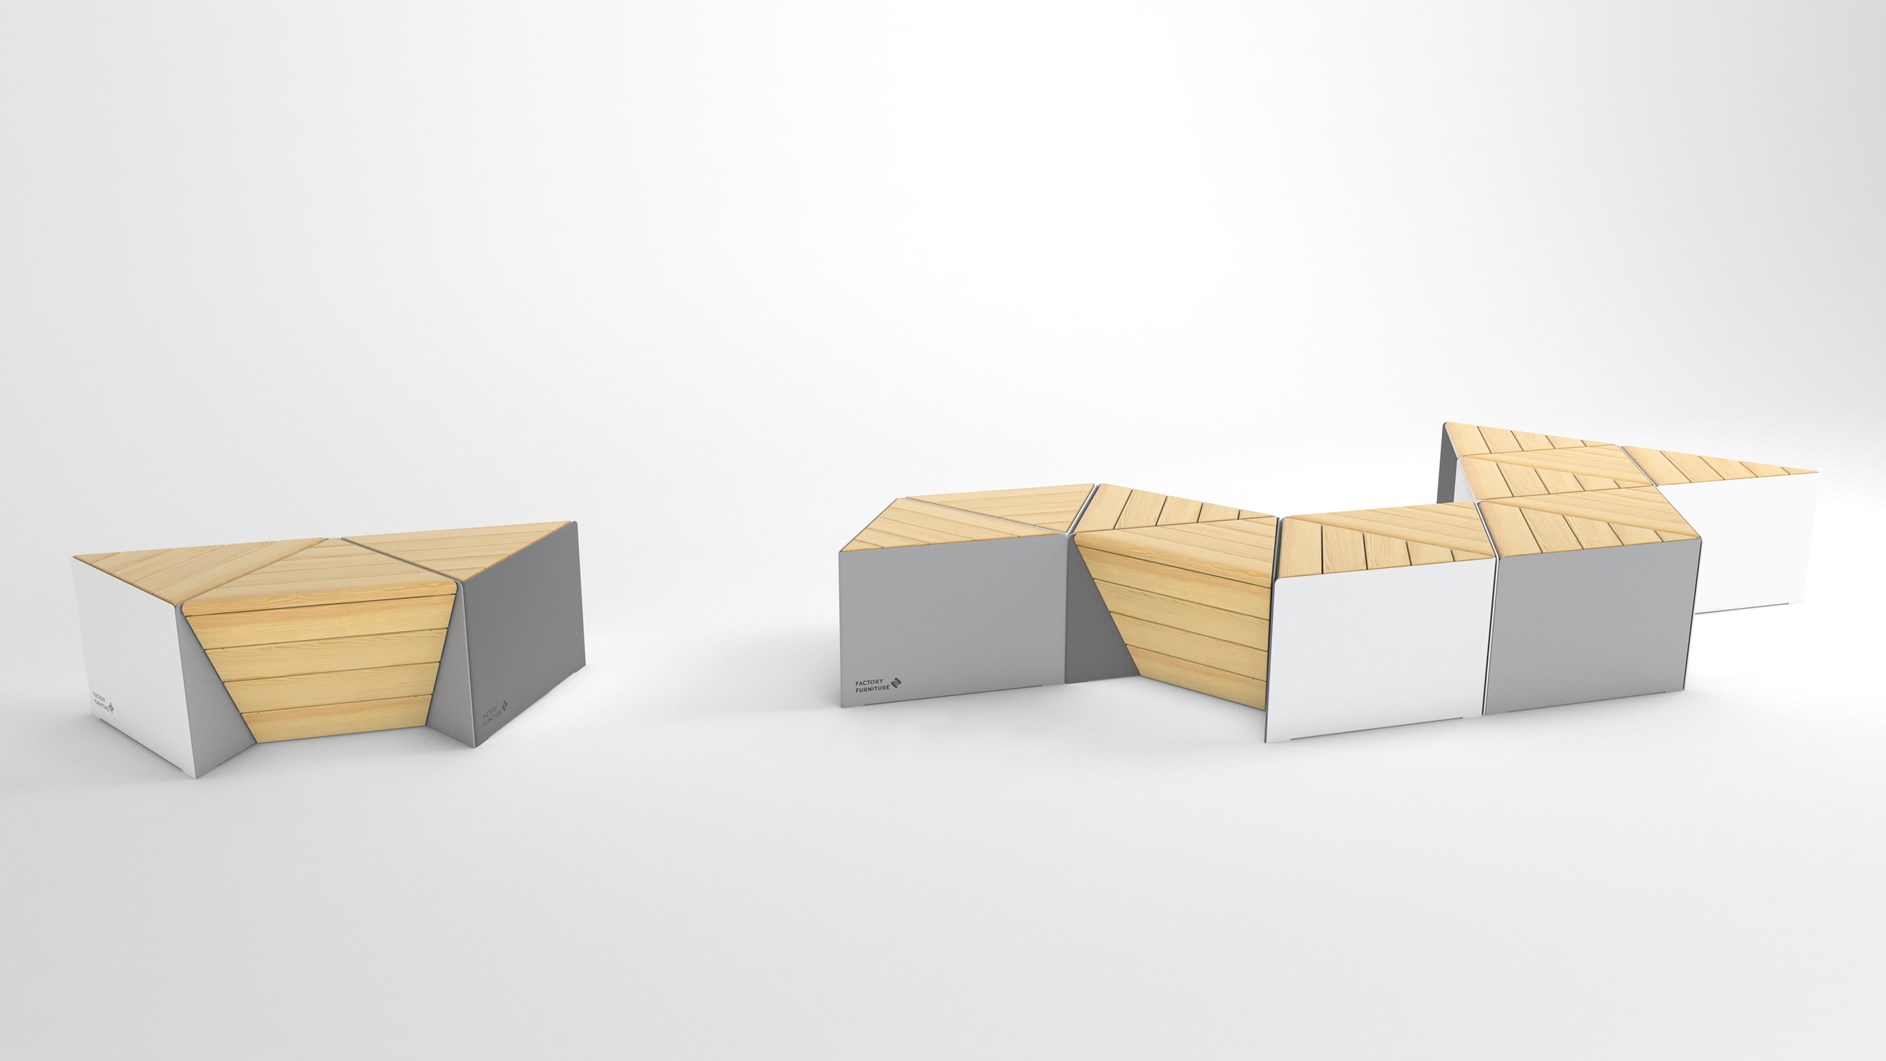 New Modular and Adaptable Public Seating by Factory Furniture